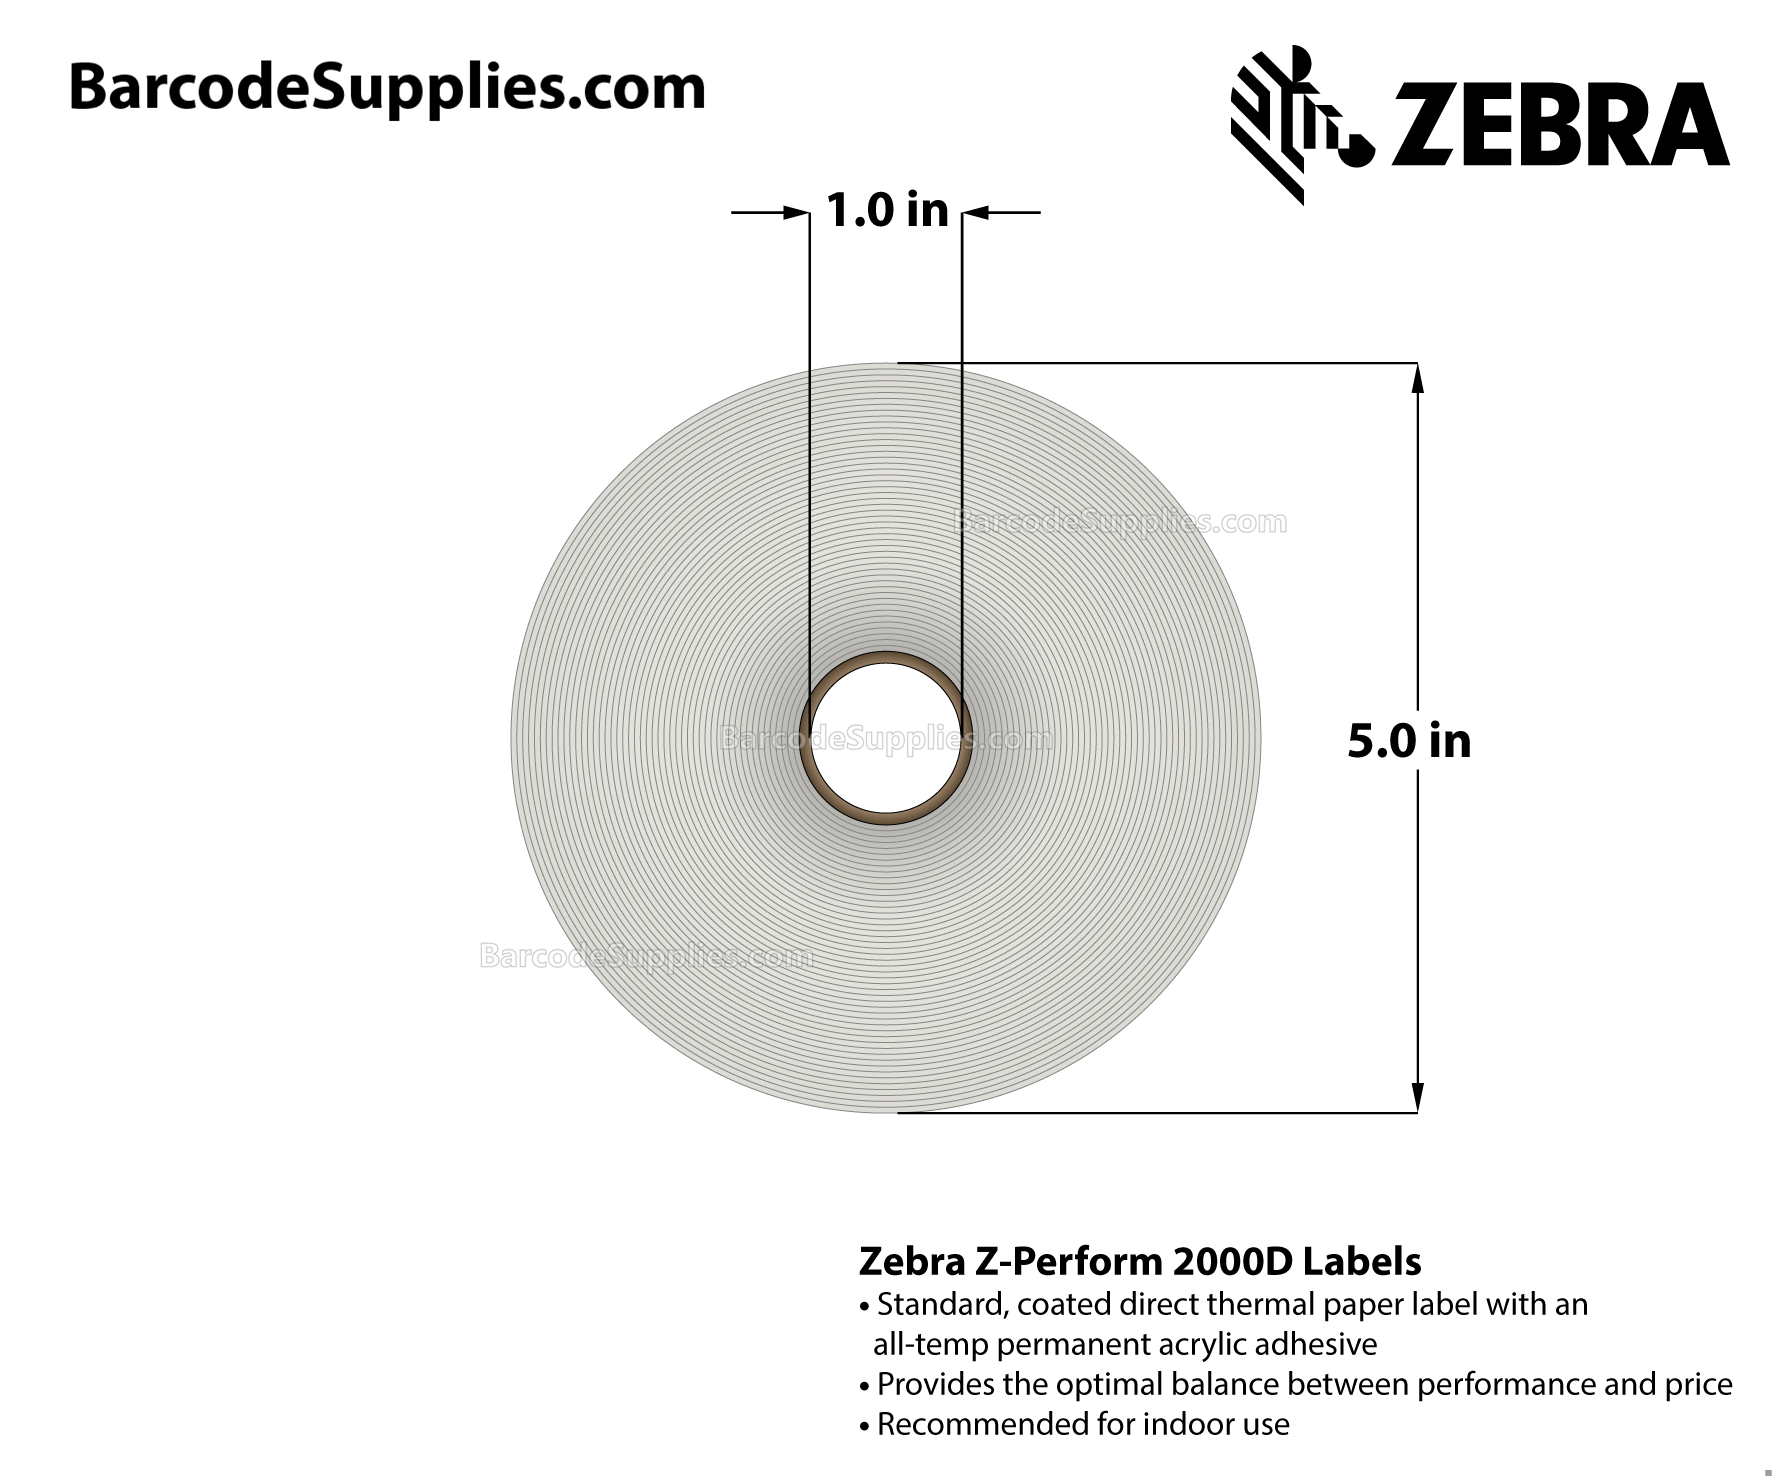 3 x 3 Direct Thermal White Z-Perform 2000D Labels With All-Temp Adhesive - Perforated - 840 Labels Per Roll - Carton Of 6 Rolls - 5040 Labels Total - MPN: 10010030